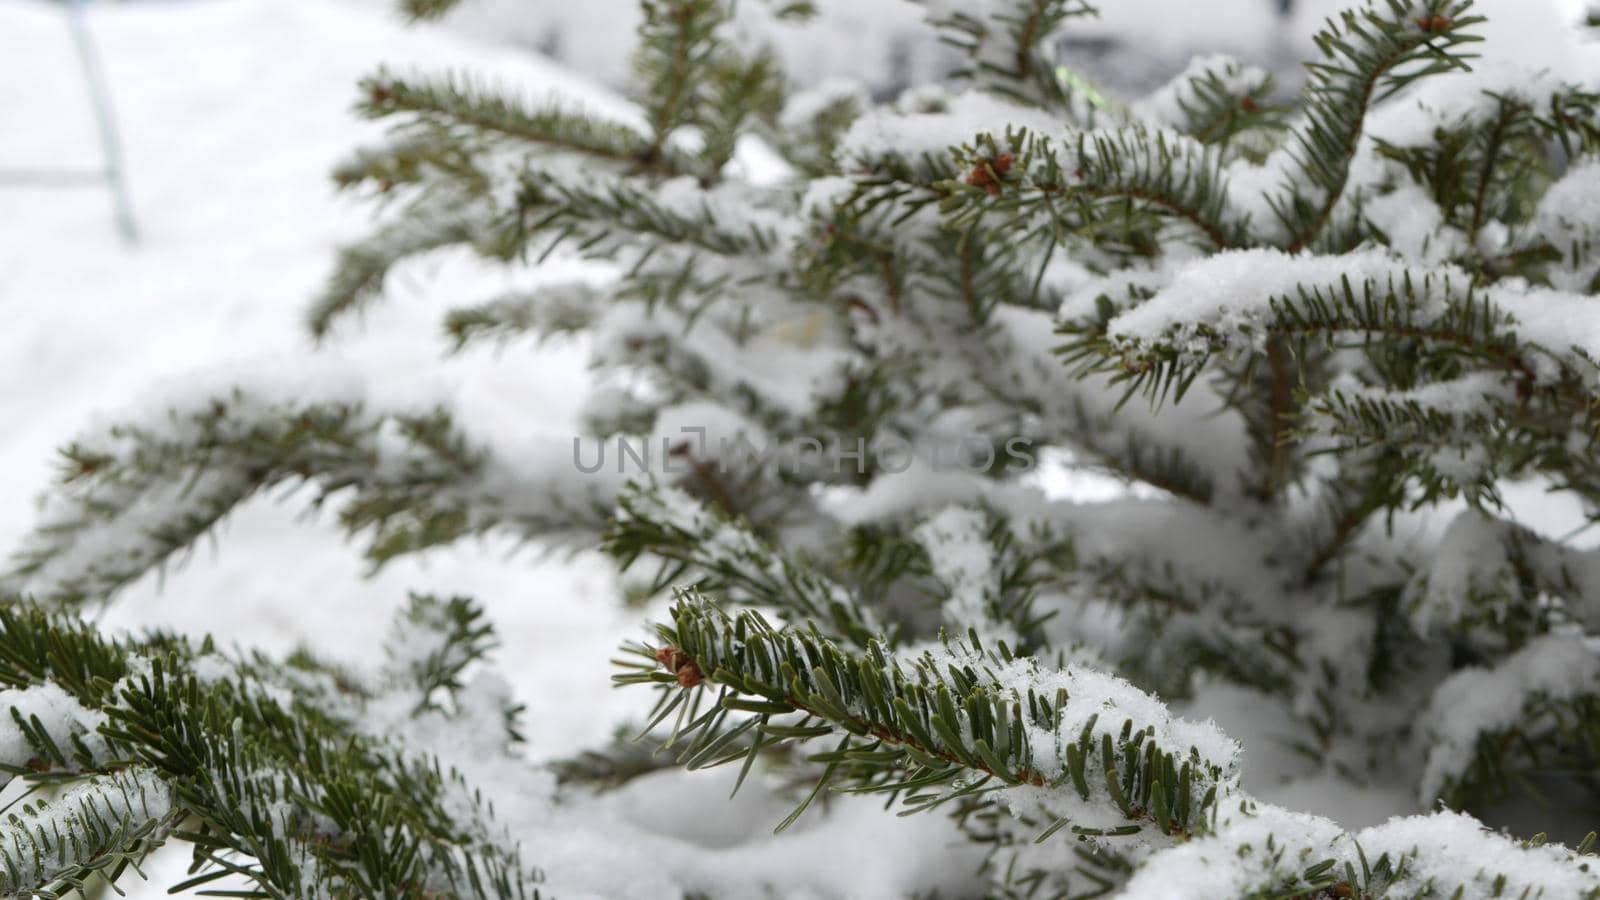 Spruce, pine or fir in snow flakes, snowflakes falling on conifer Christmas tree by DogoraSun